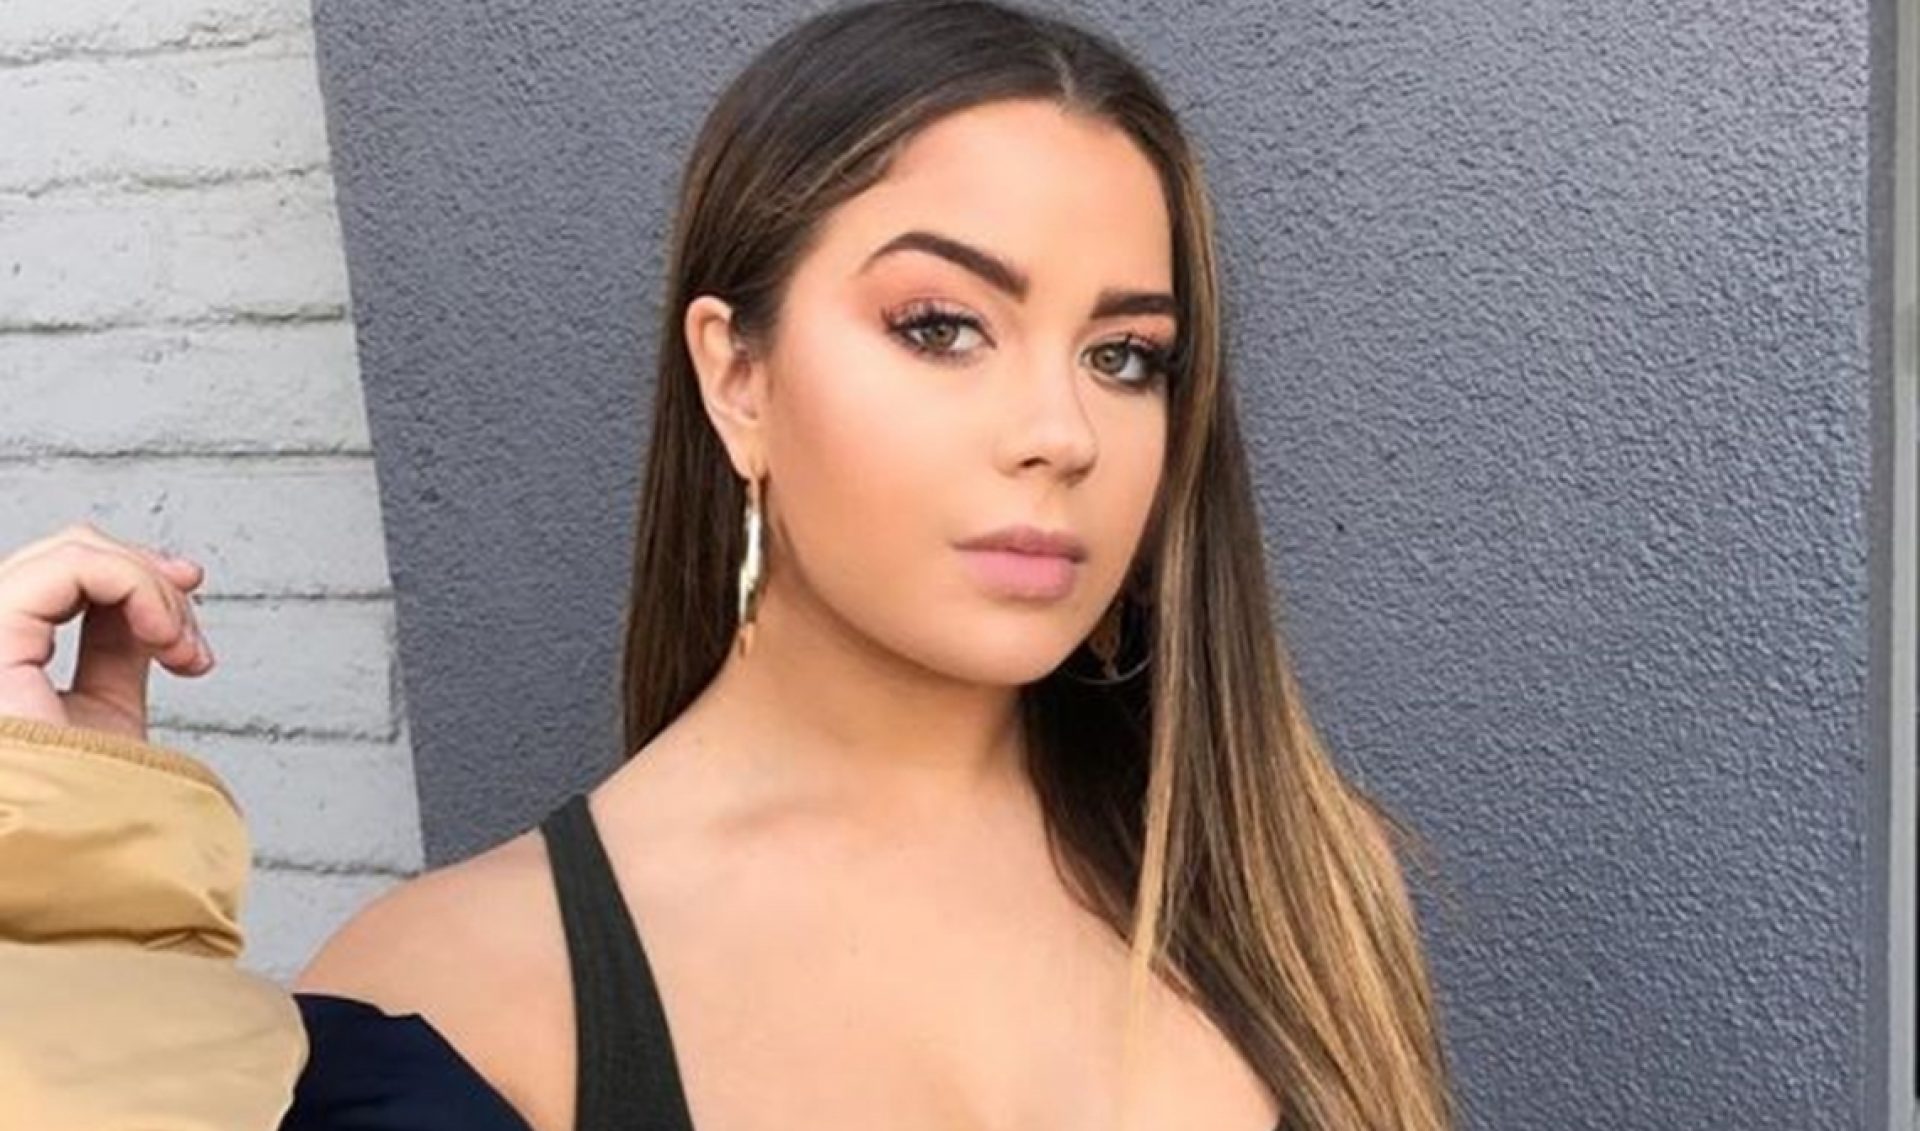 YouTube Millionaires: With Her “Feminine, Edgy, And Chic” Style, Tessa Brooks Thrives